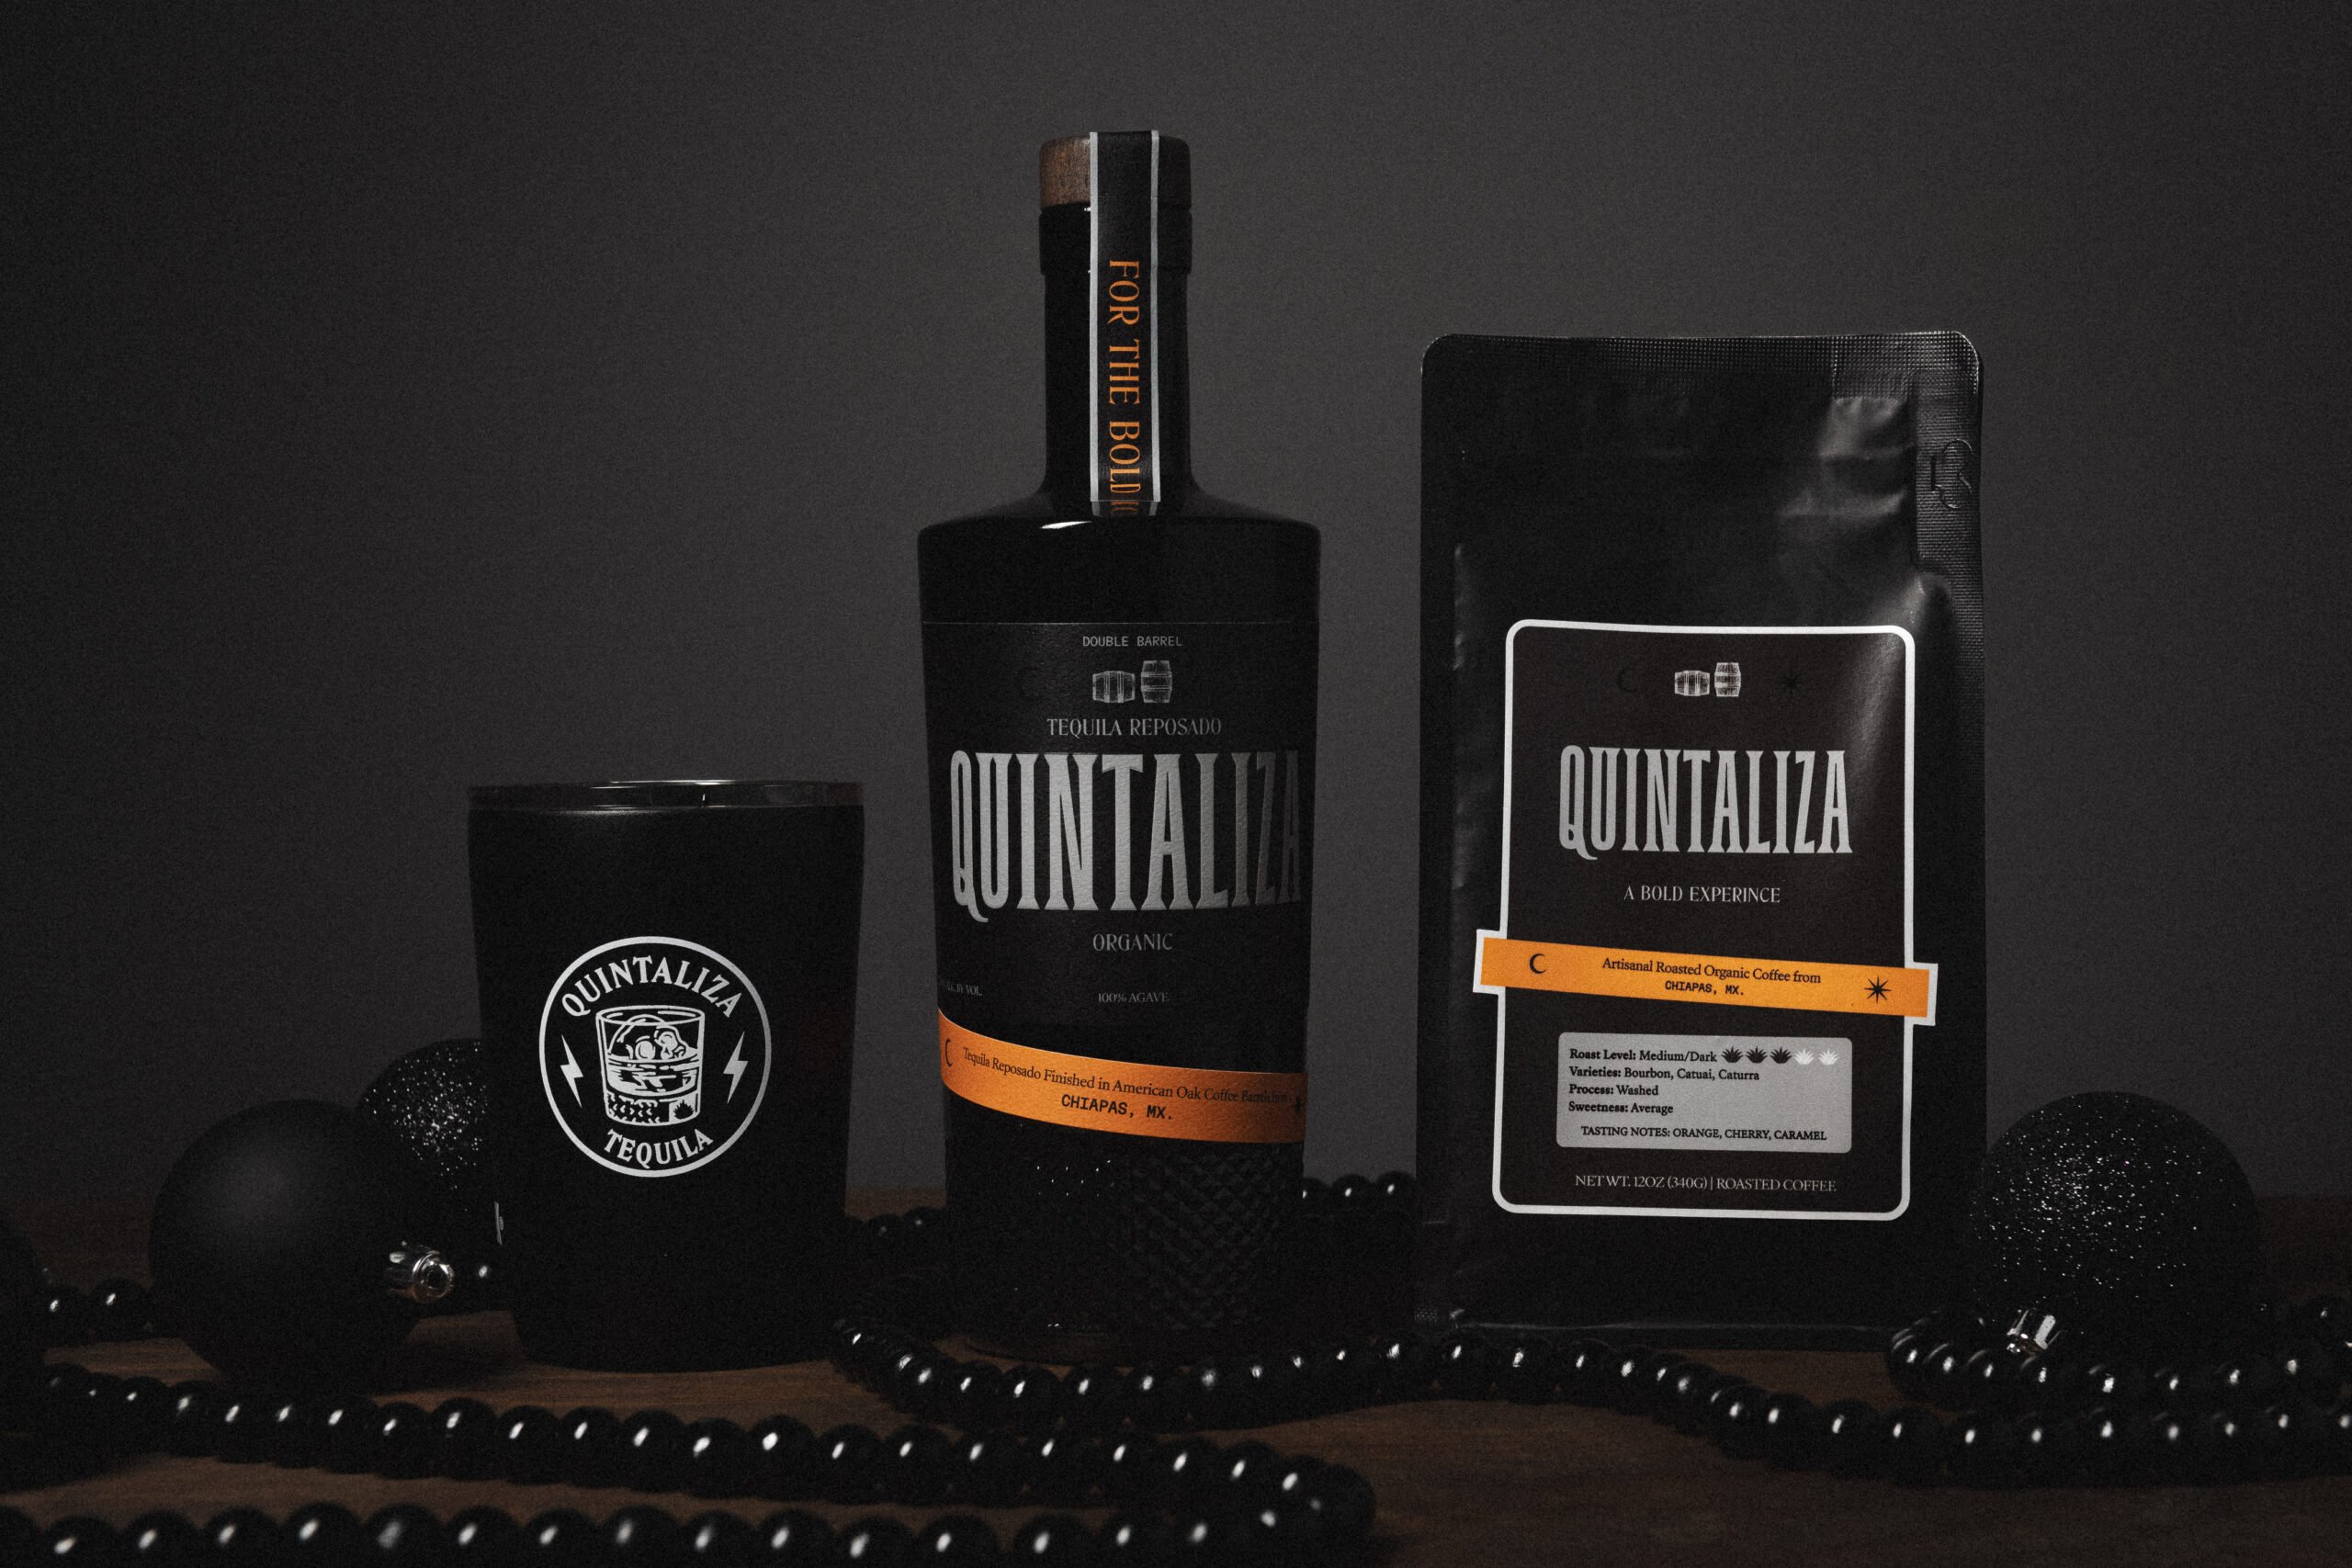  Quintaliza Reposado bottle with cup and coffee